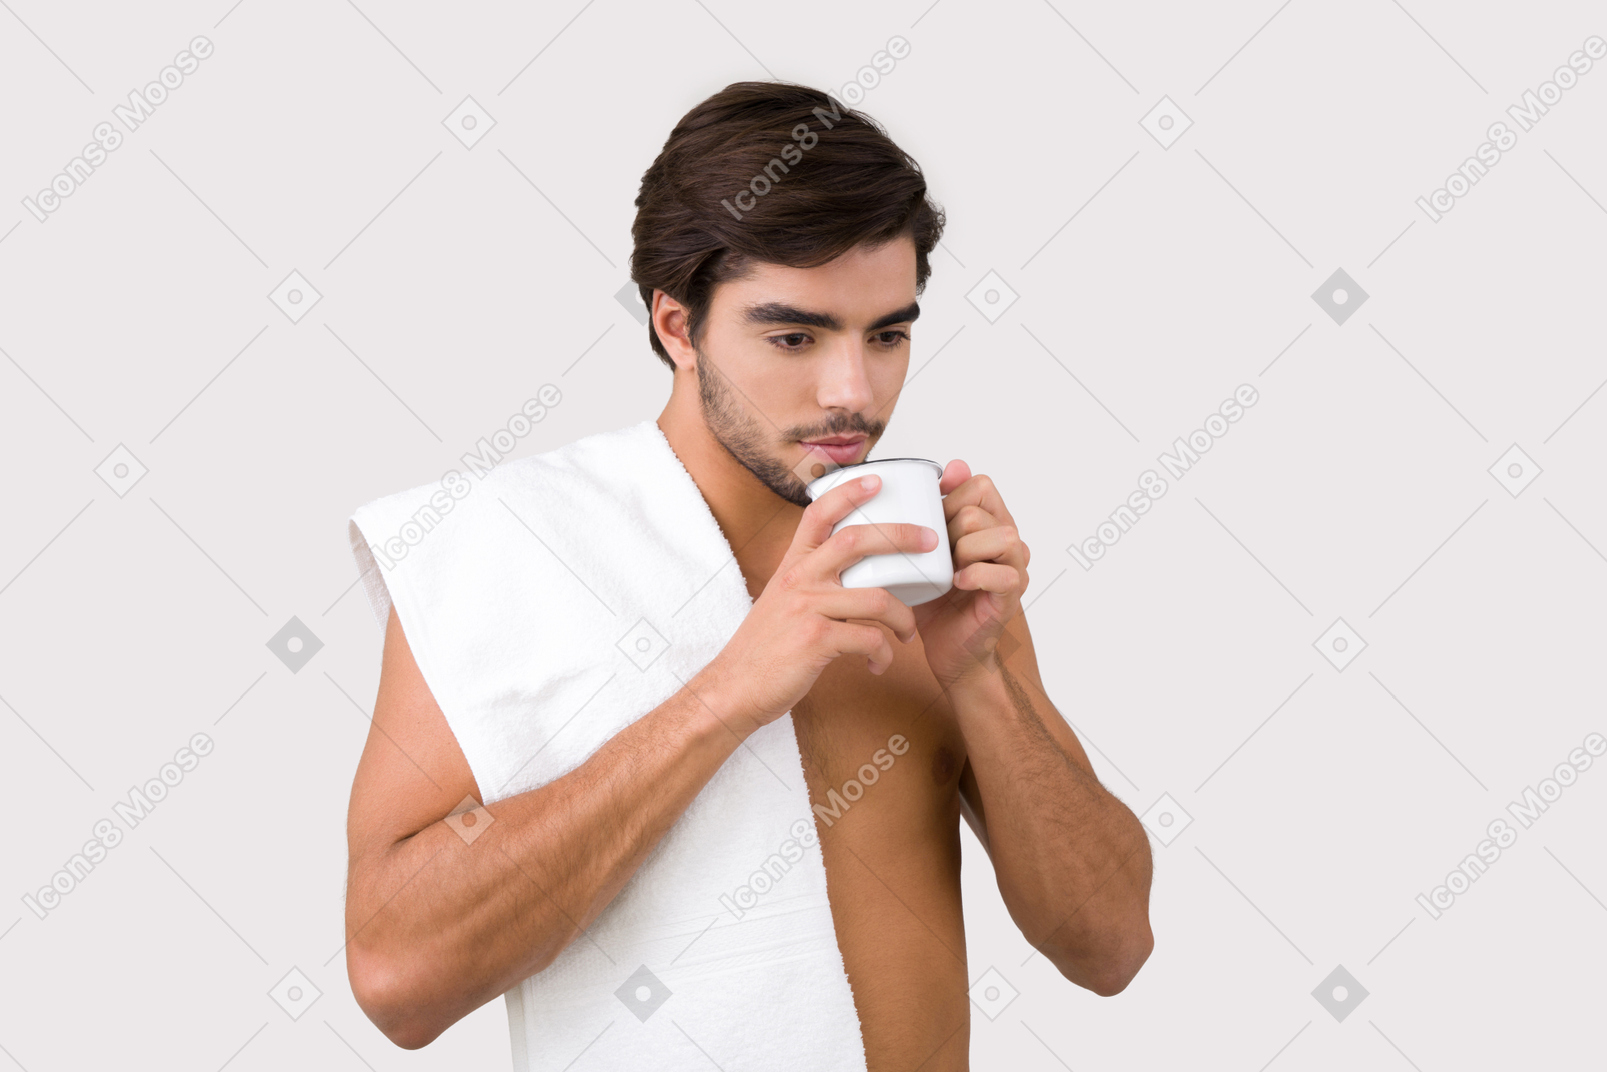 Coffee after shower is one of the best things